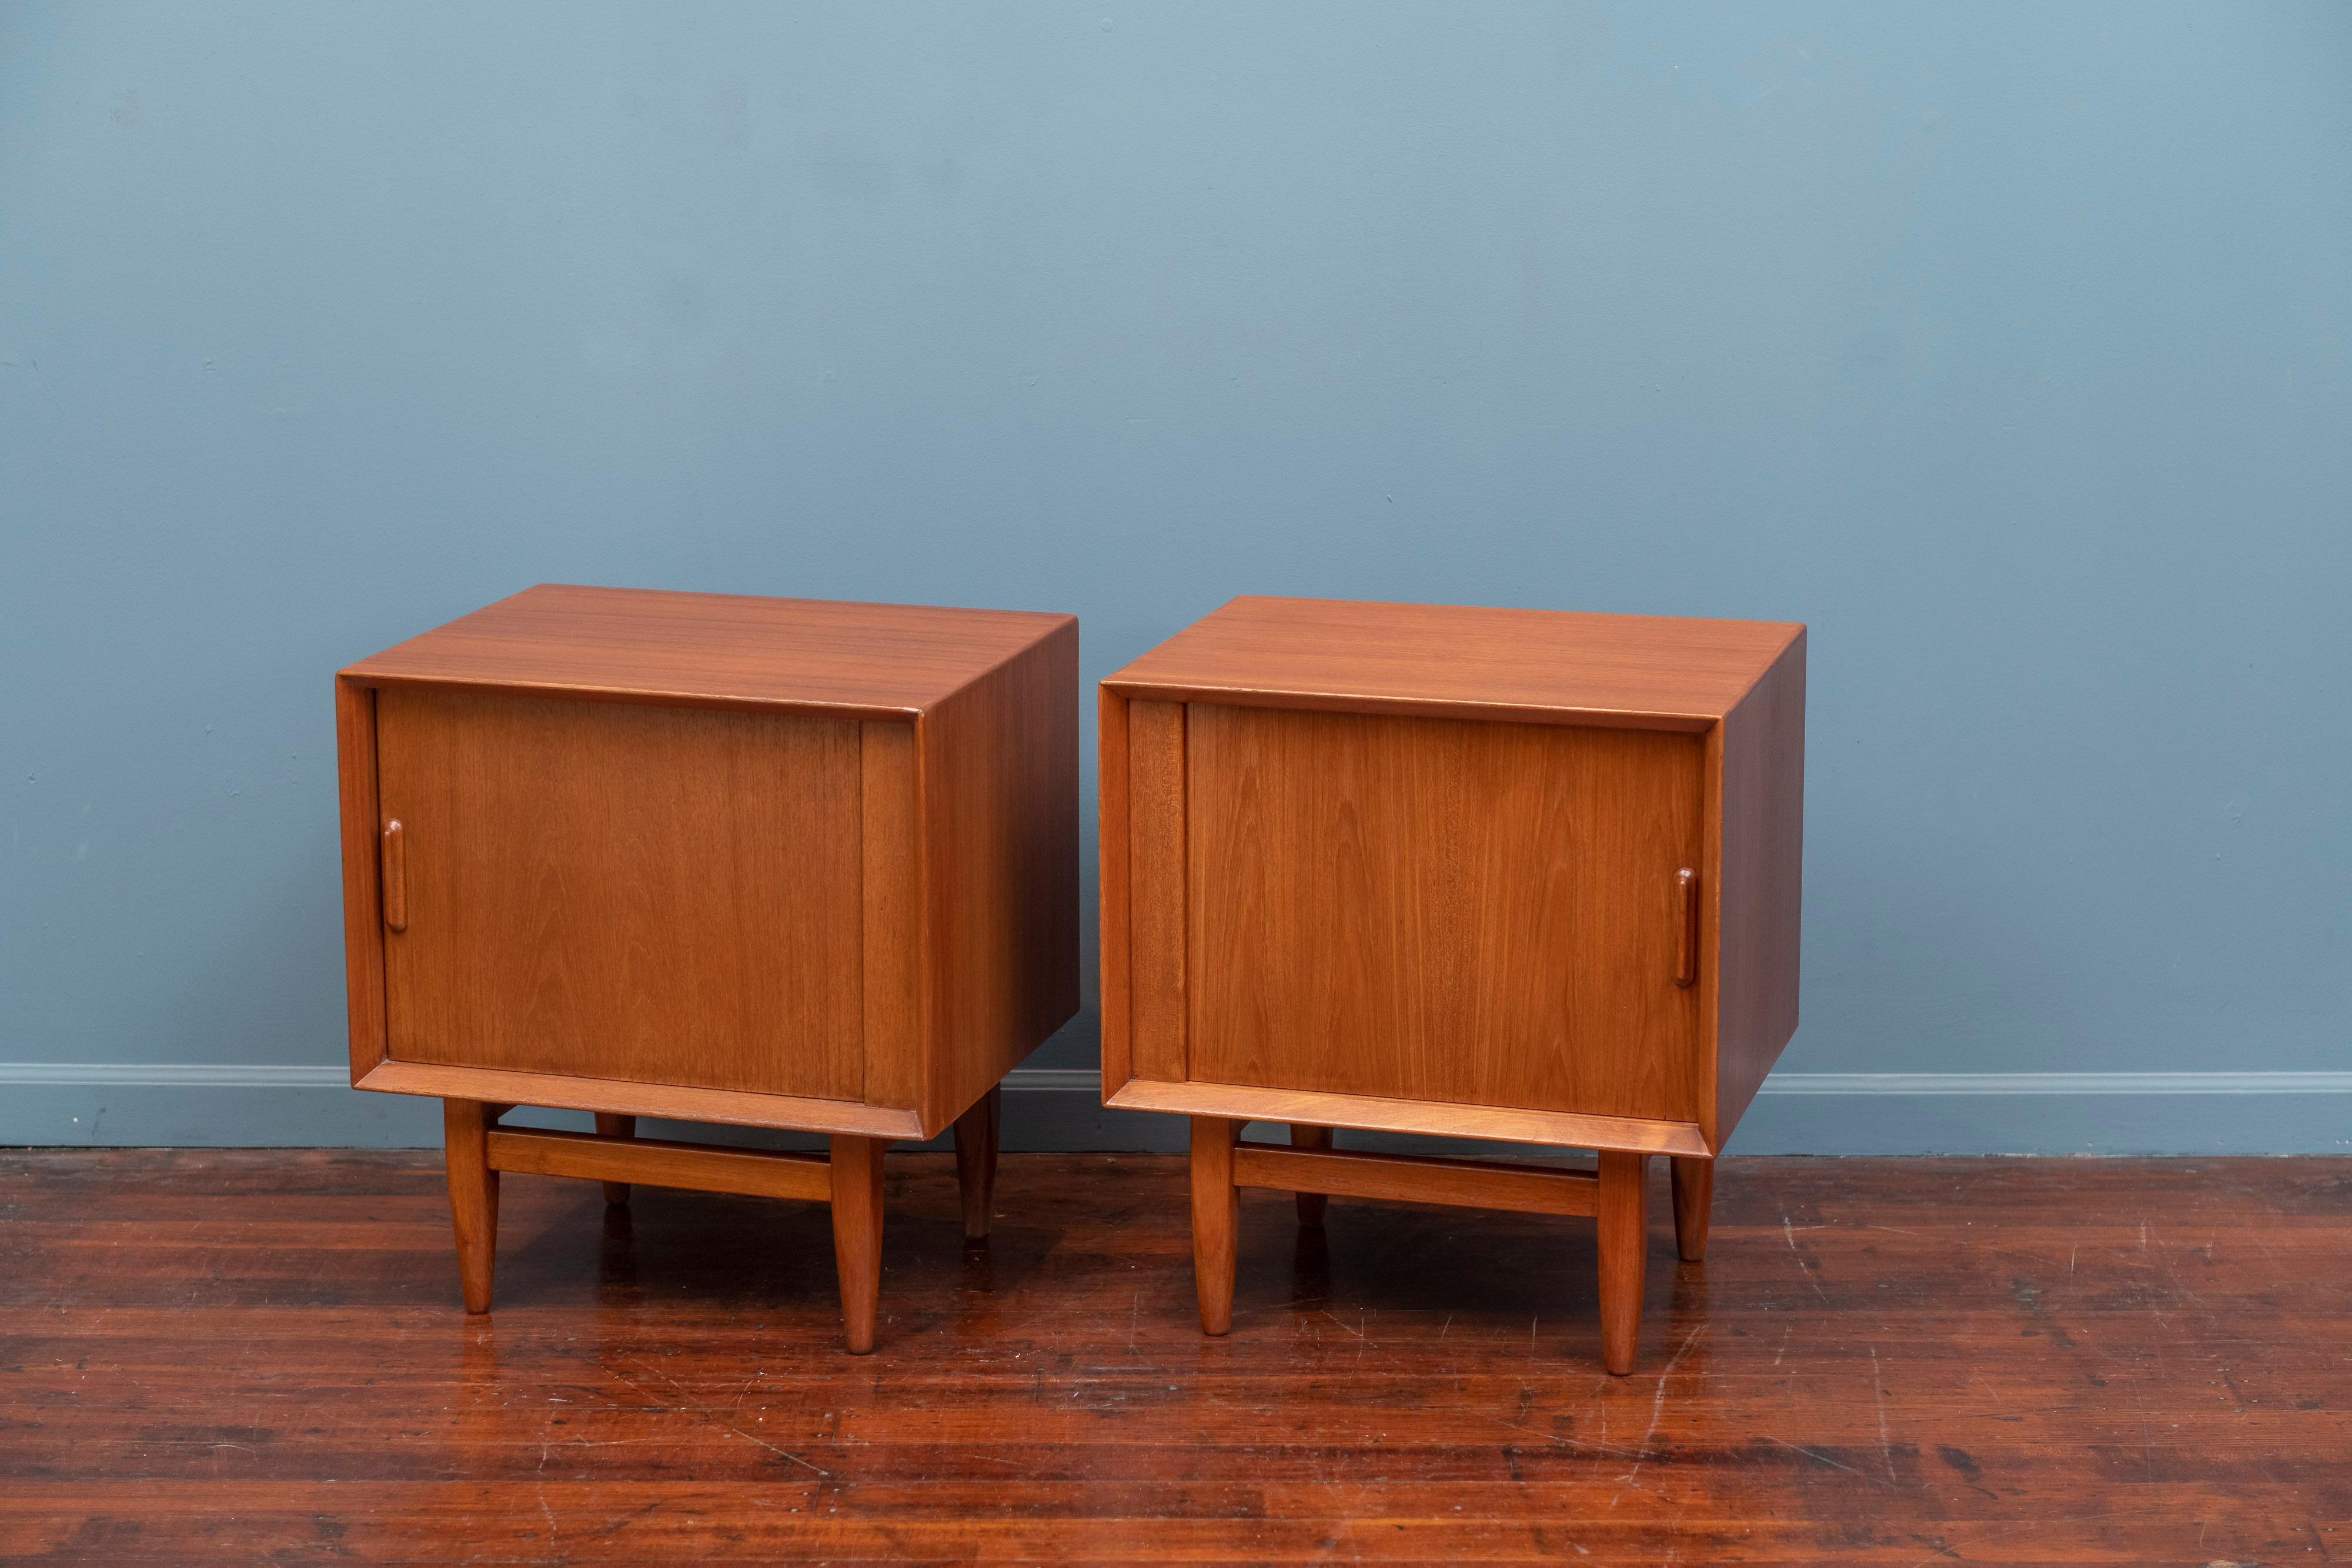 Scandinavian teak nightstands by Falster, Denmark. High quality construction and design made with a teak exterior and satinwood interiors each having a left and right sliding door, a single drawer and shelf. 
Newly refinished and ready to enjoy.